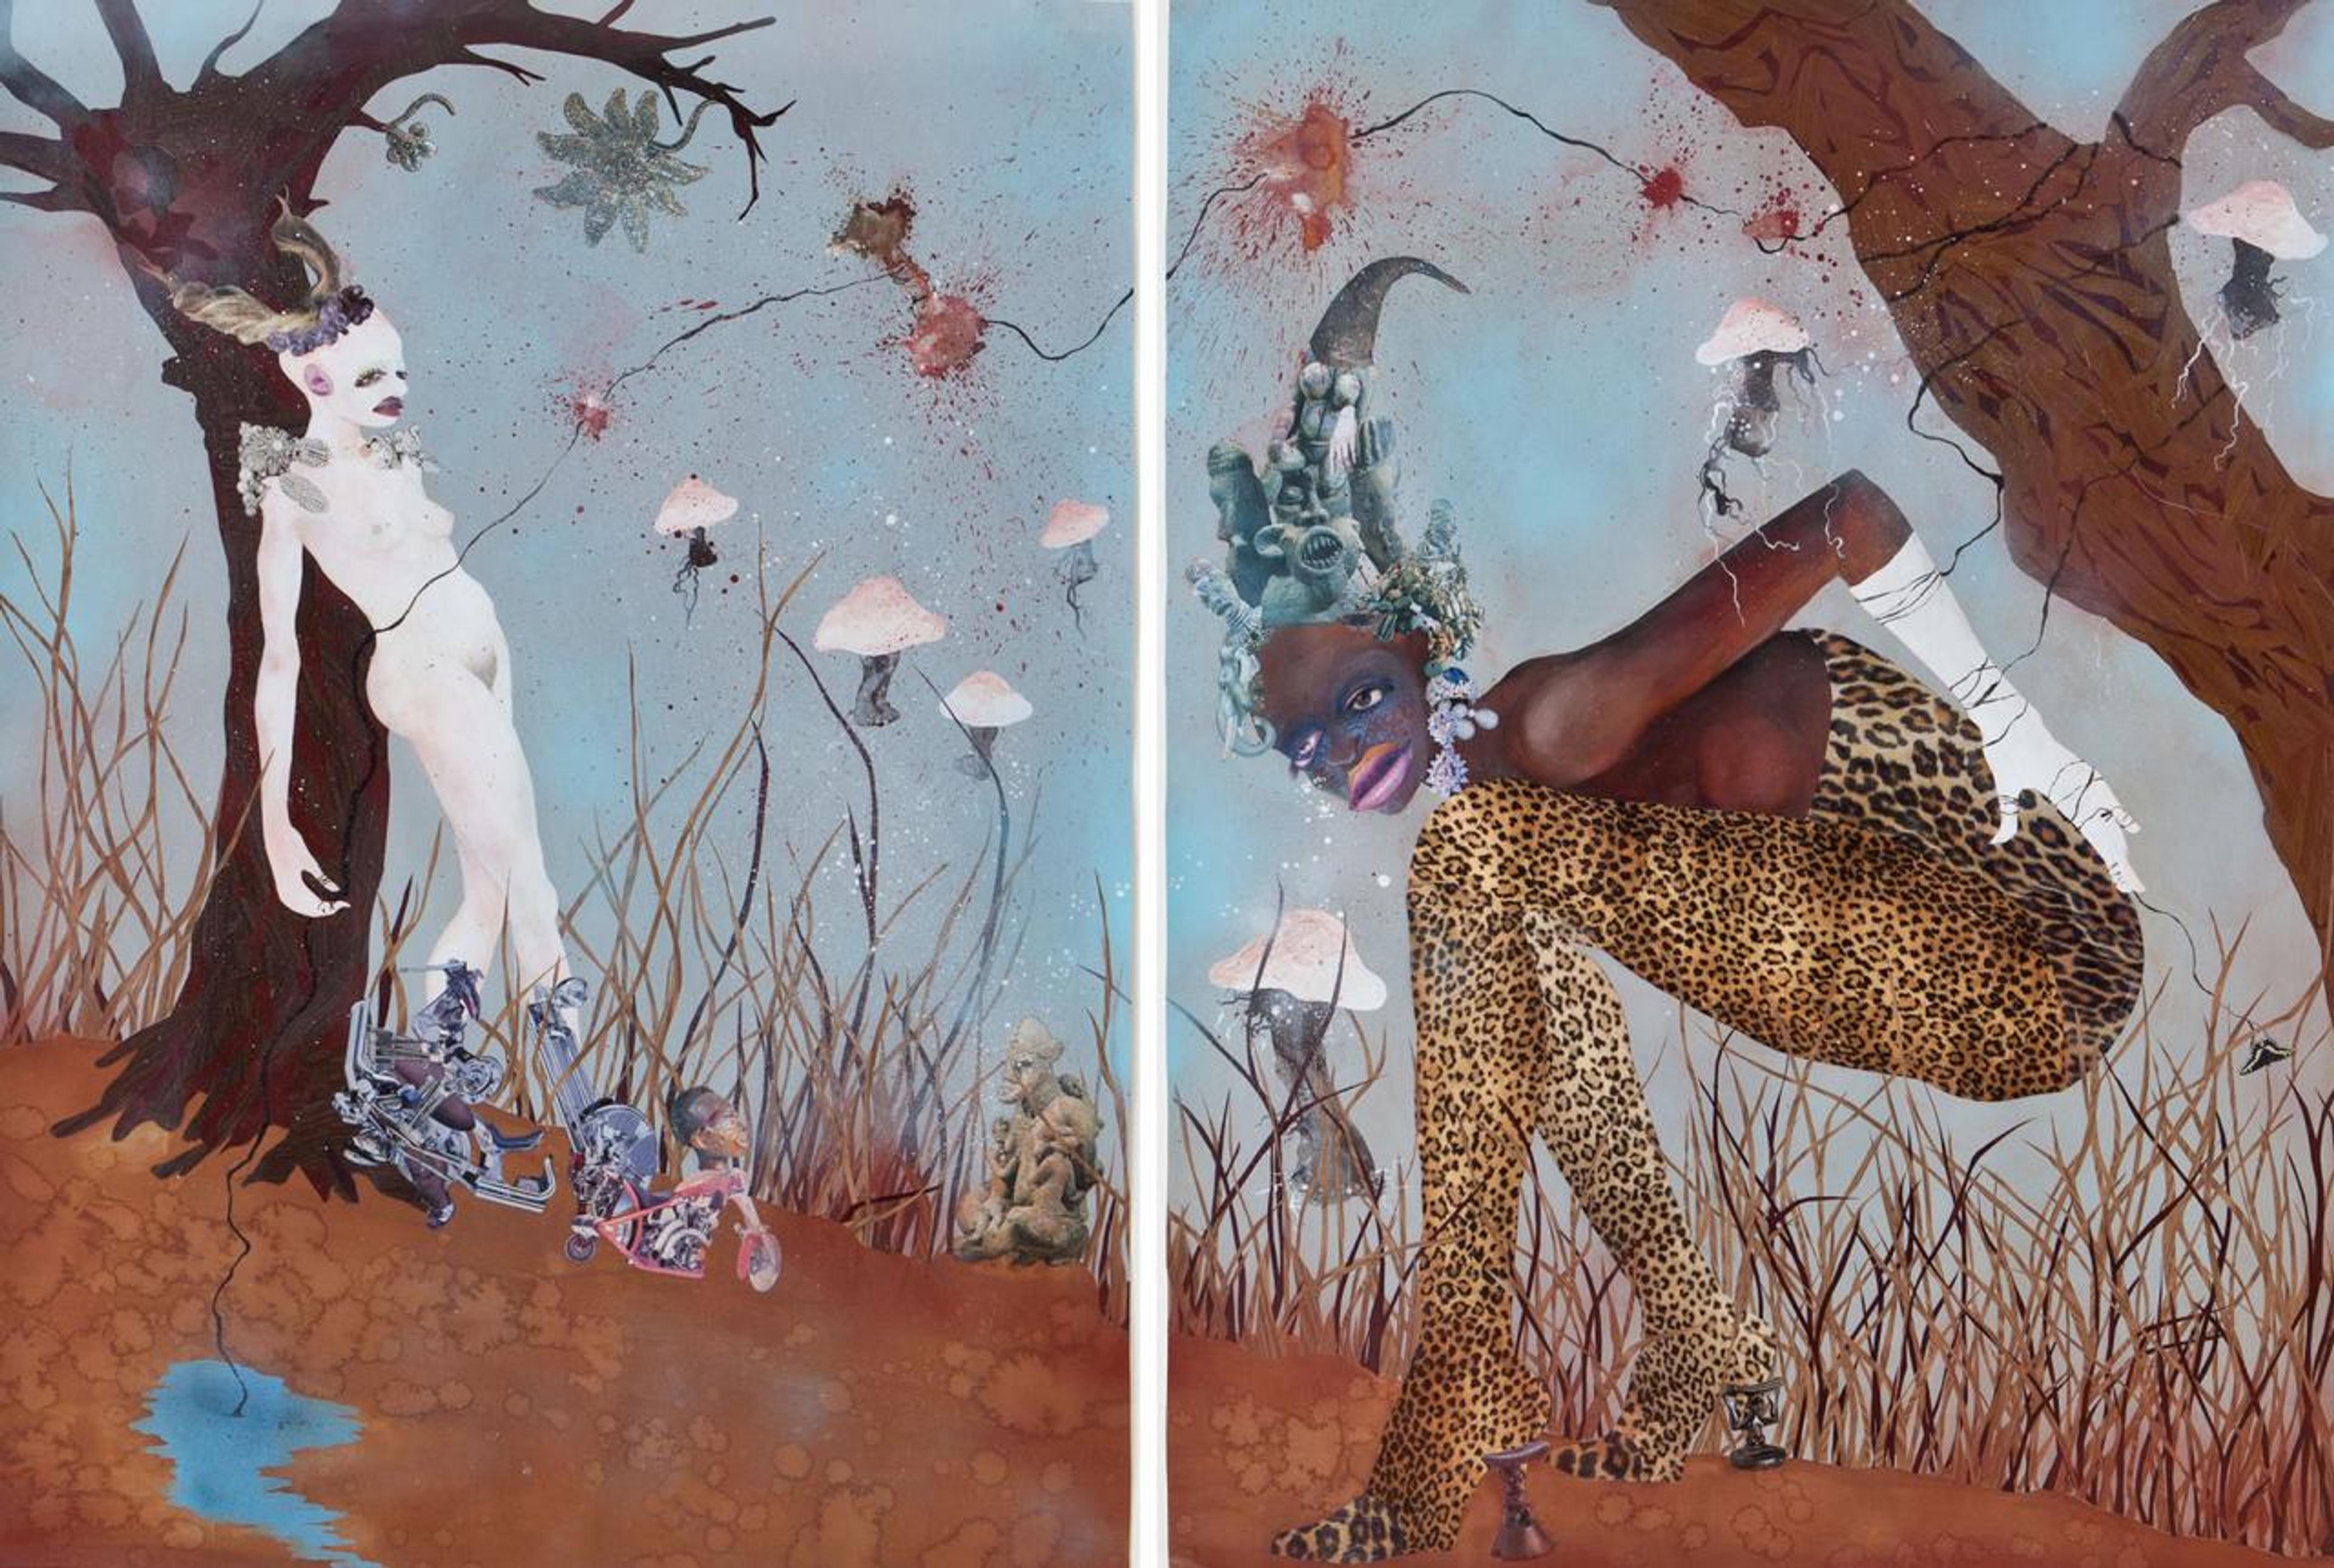 Wangechi Mutu, People in Glass Towers Should Not Imagine Us, 2003, mixed media collage on paper, diptych, 355.5 x 259 cm